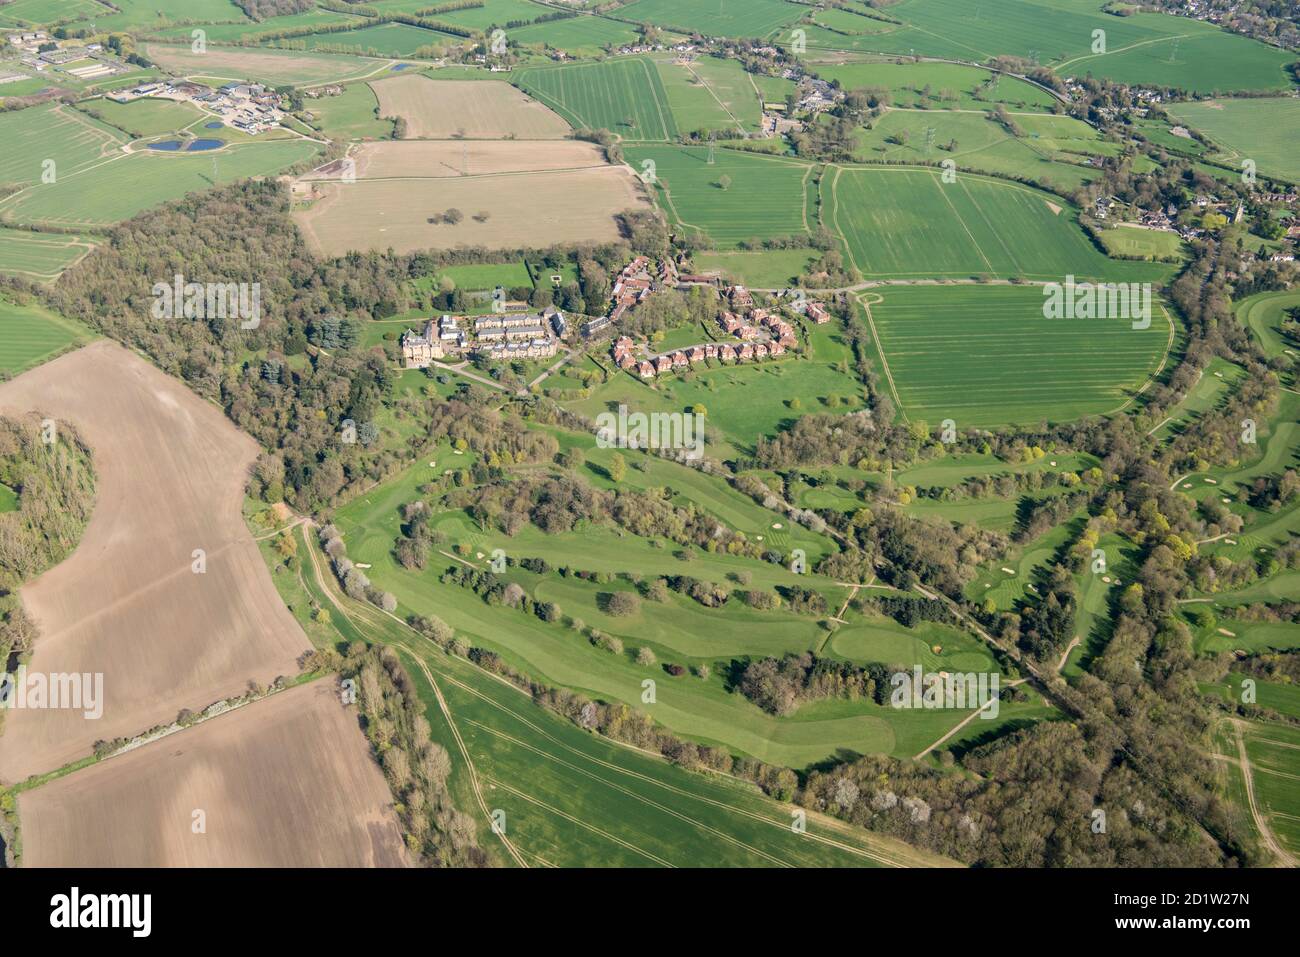 Wall Hall,  Humphry Repton produced a Red Book in 1803, Watford, Hertfordshire, UK. Aerial view. Stock Photo